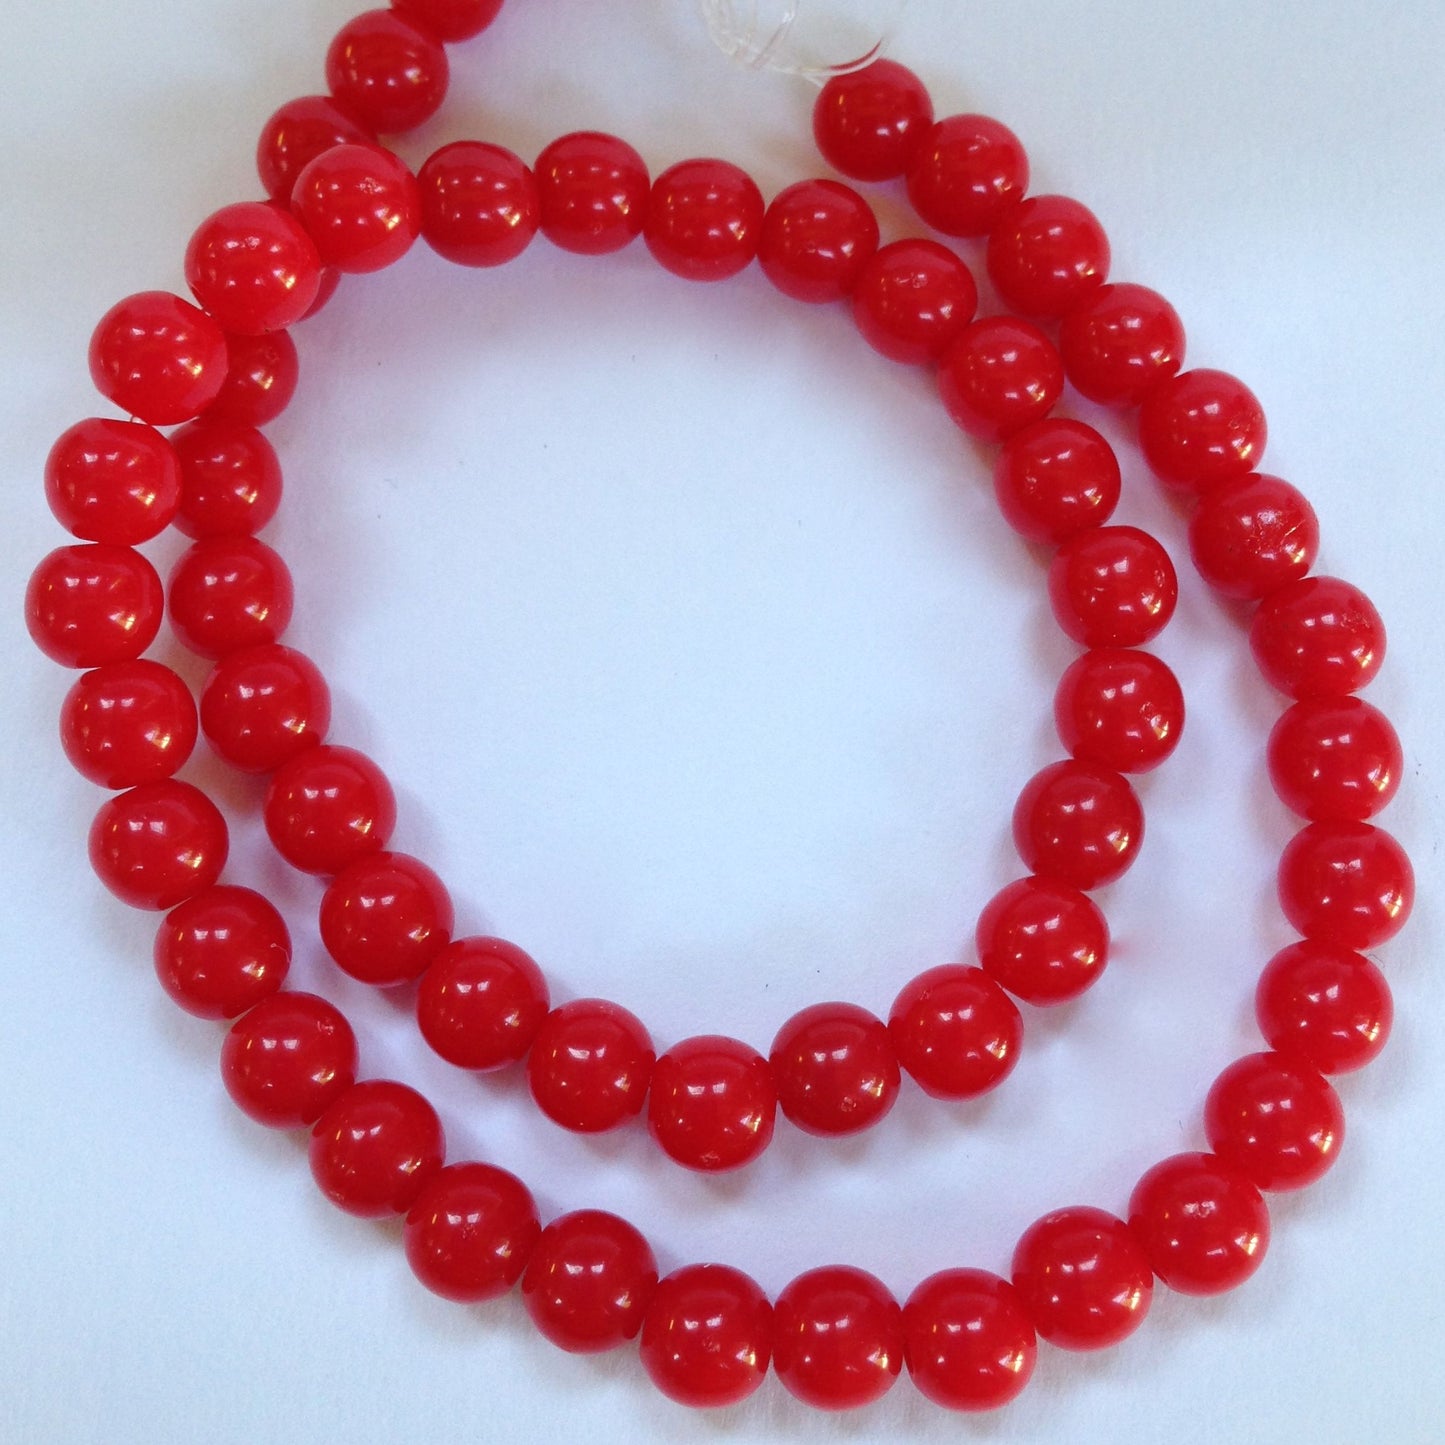 6mm Italian Lucite Resin Scarlet Red Beads, 12 inch strand